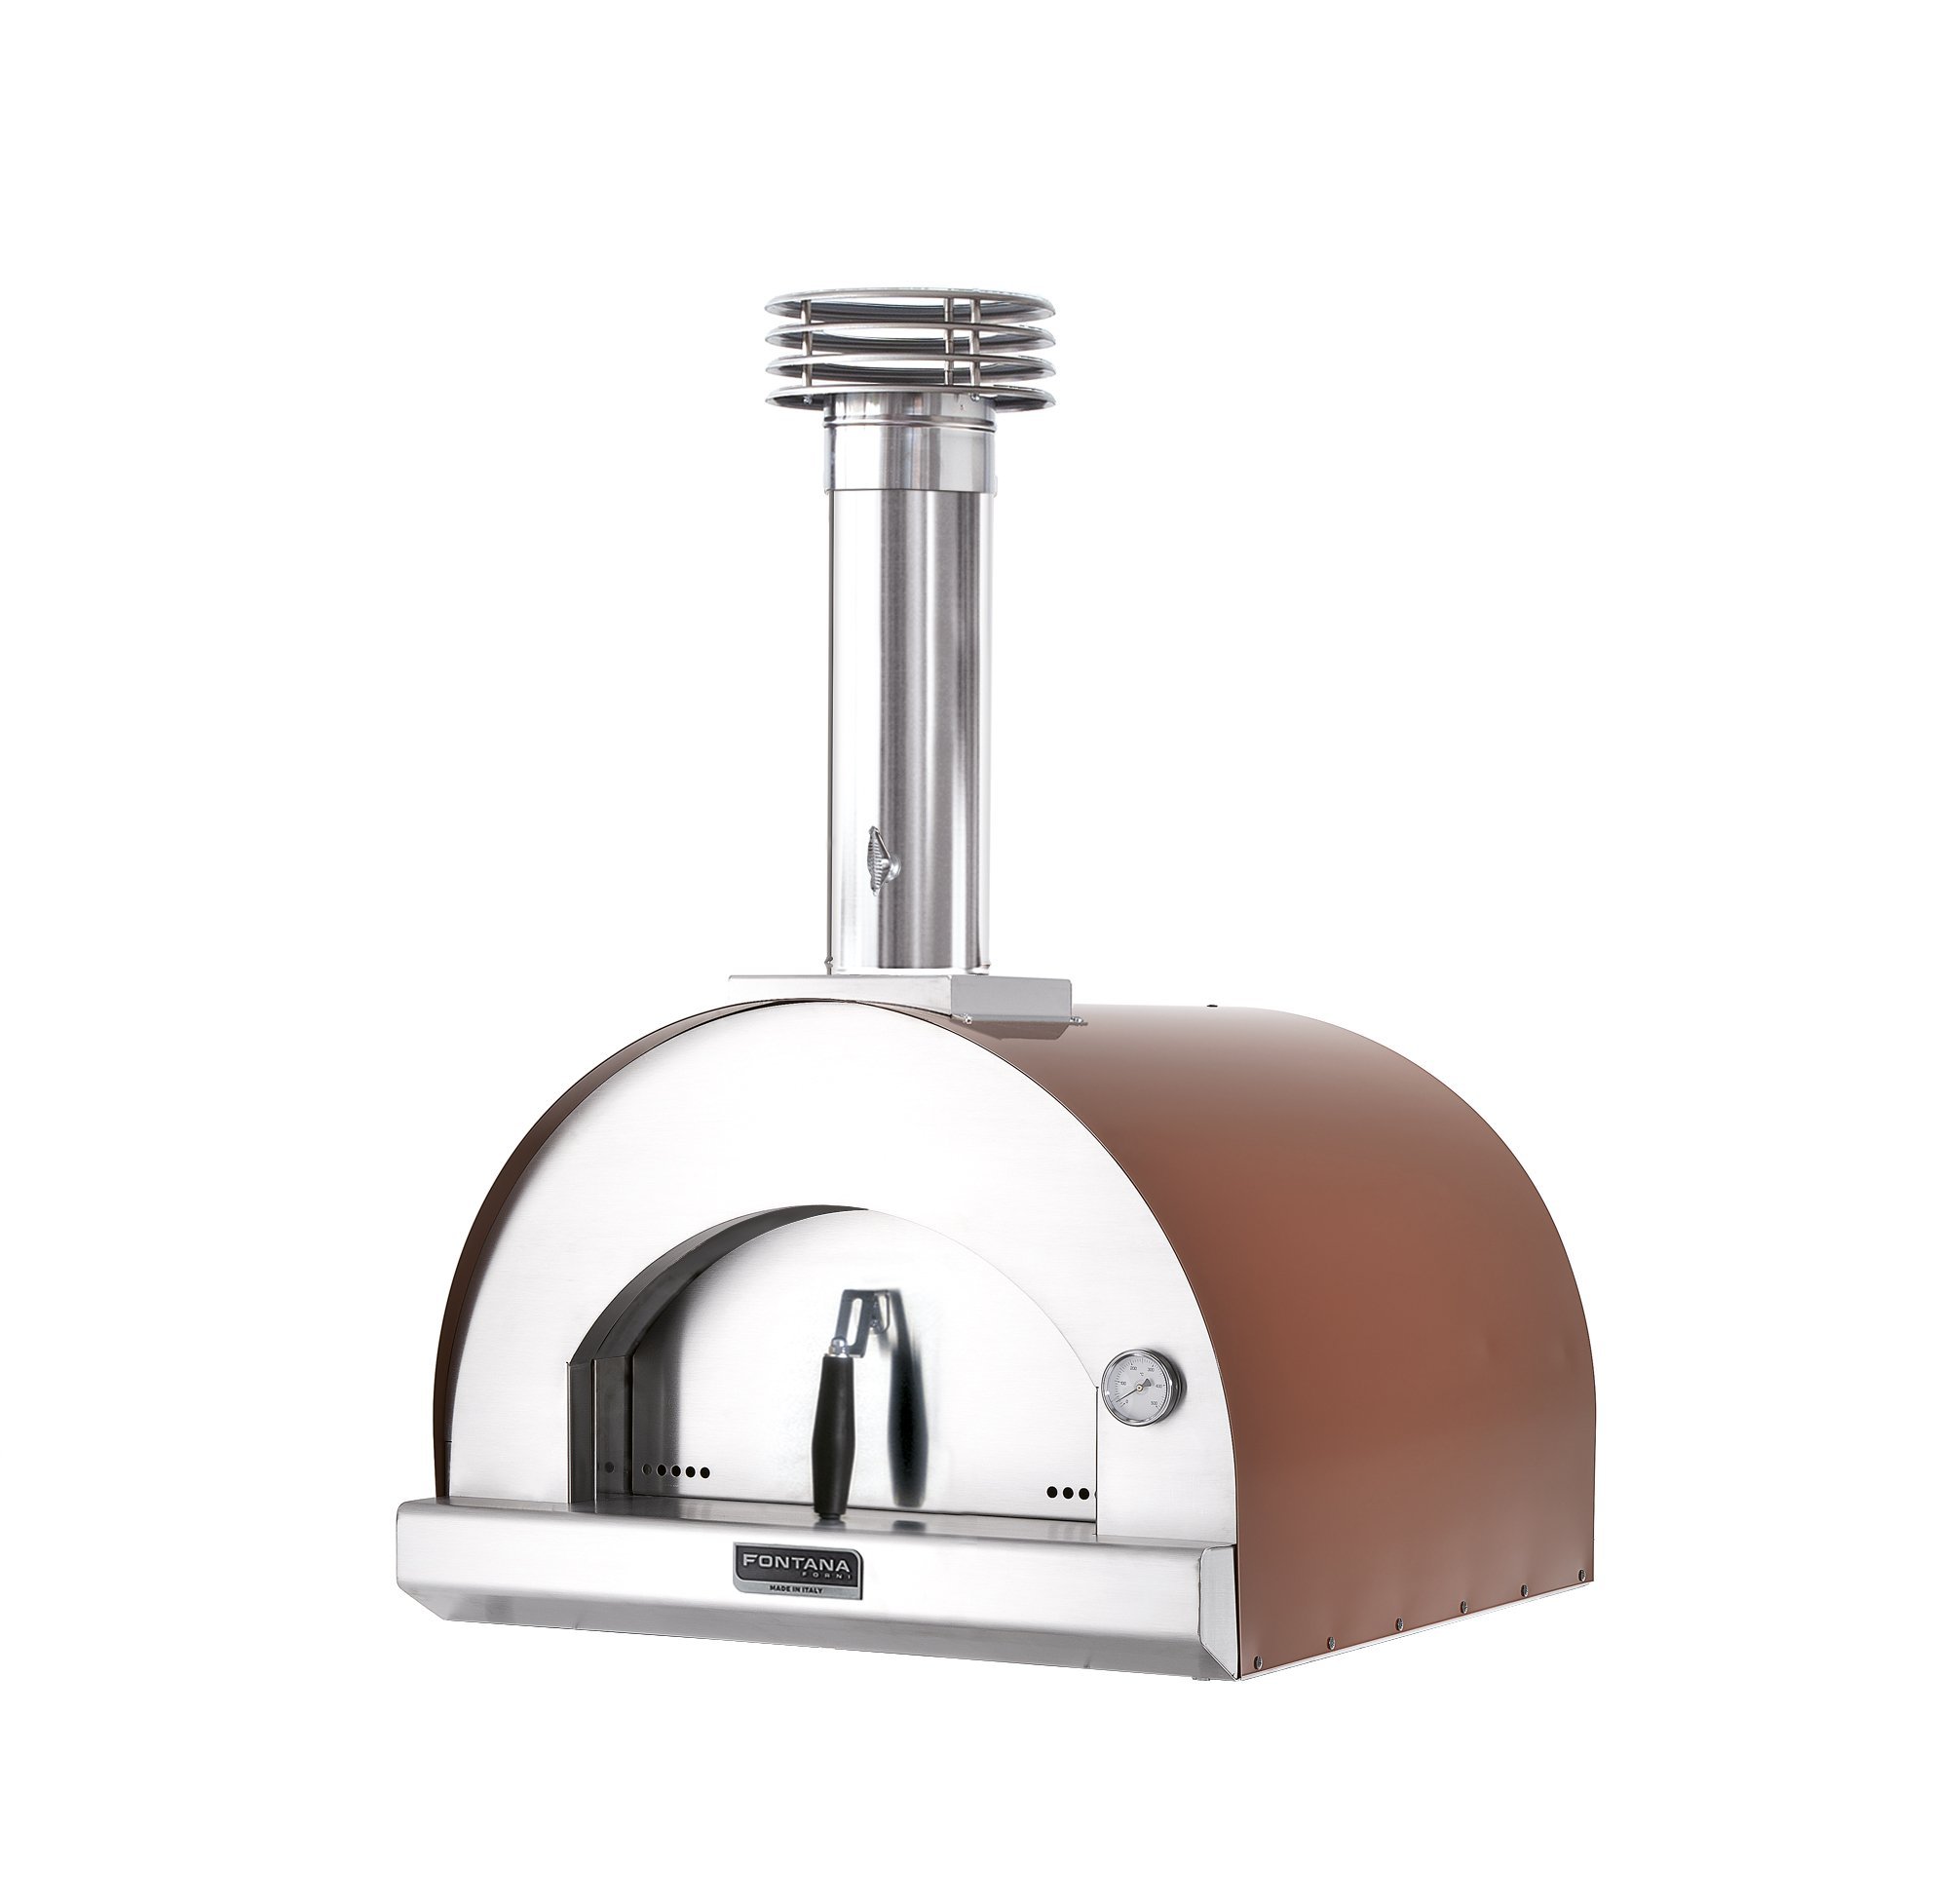 Dome oven Fontana Margherita with wood firing, pizza oven for outdoor kitchen